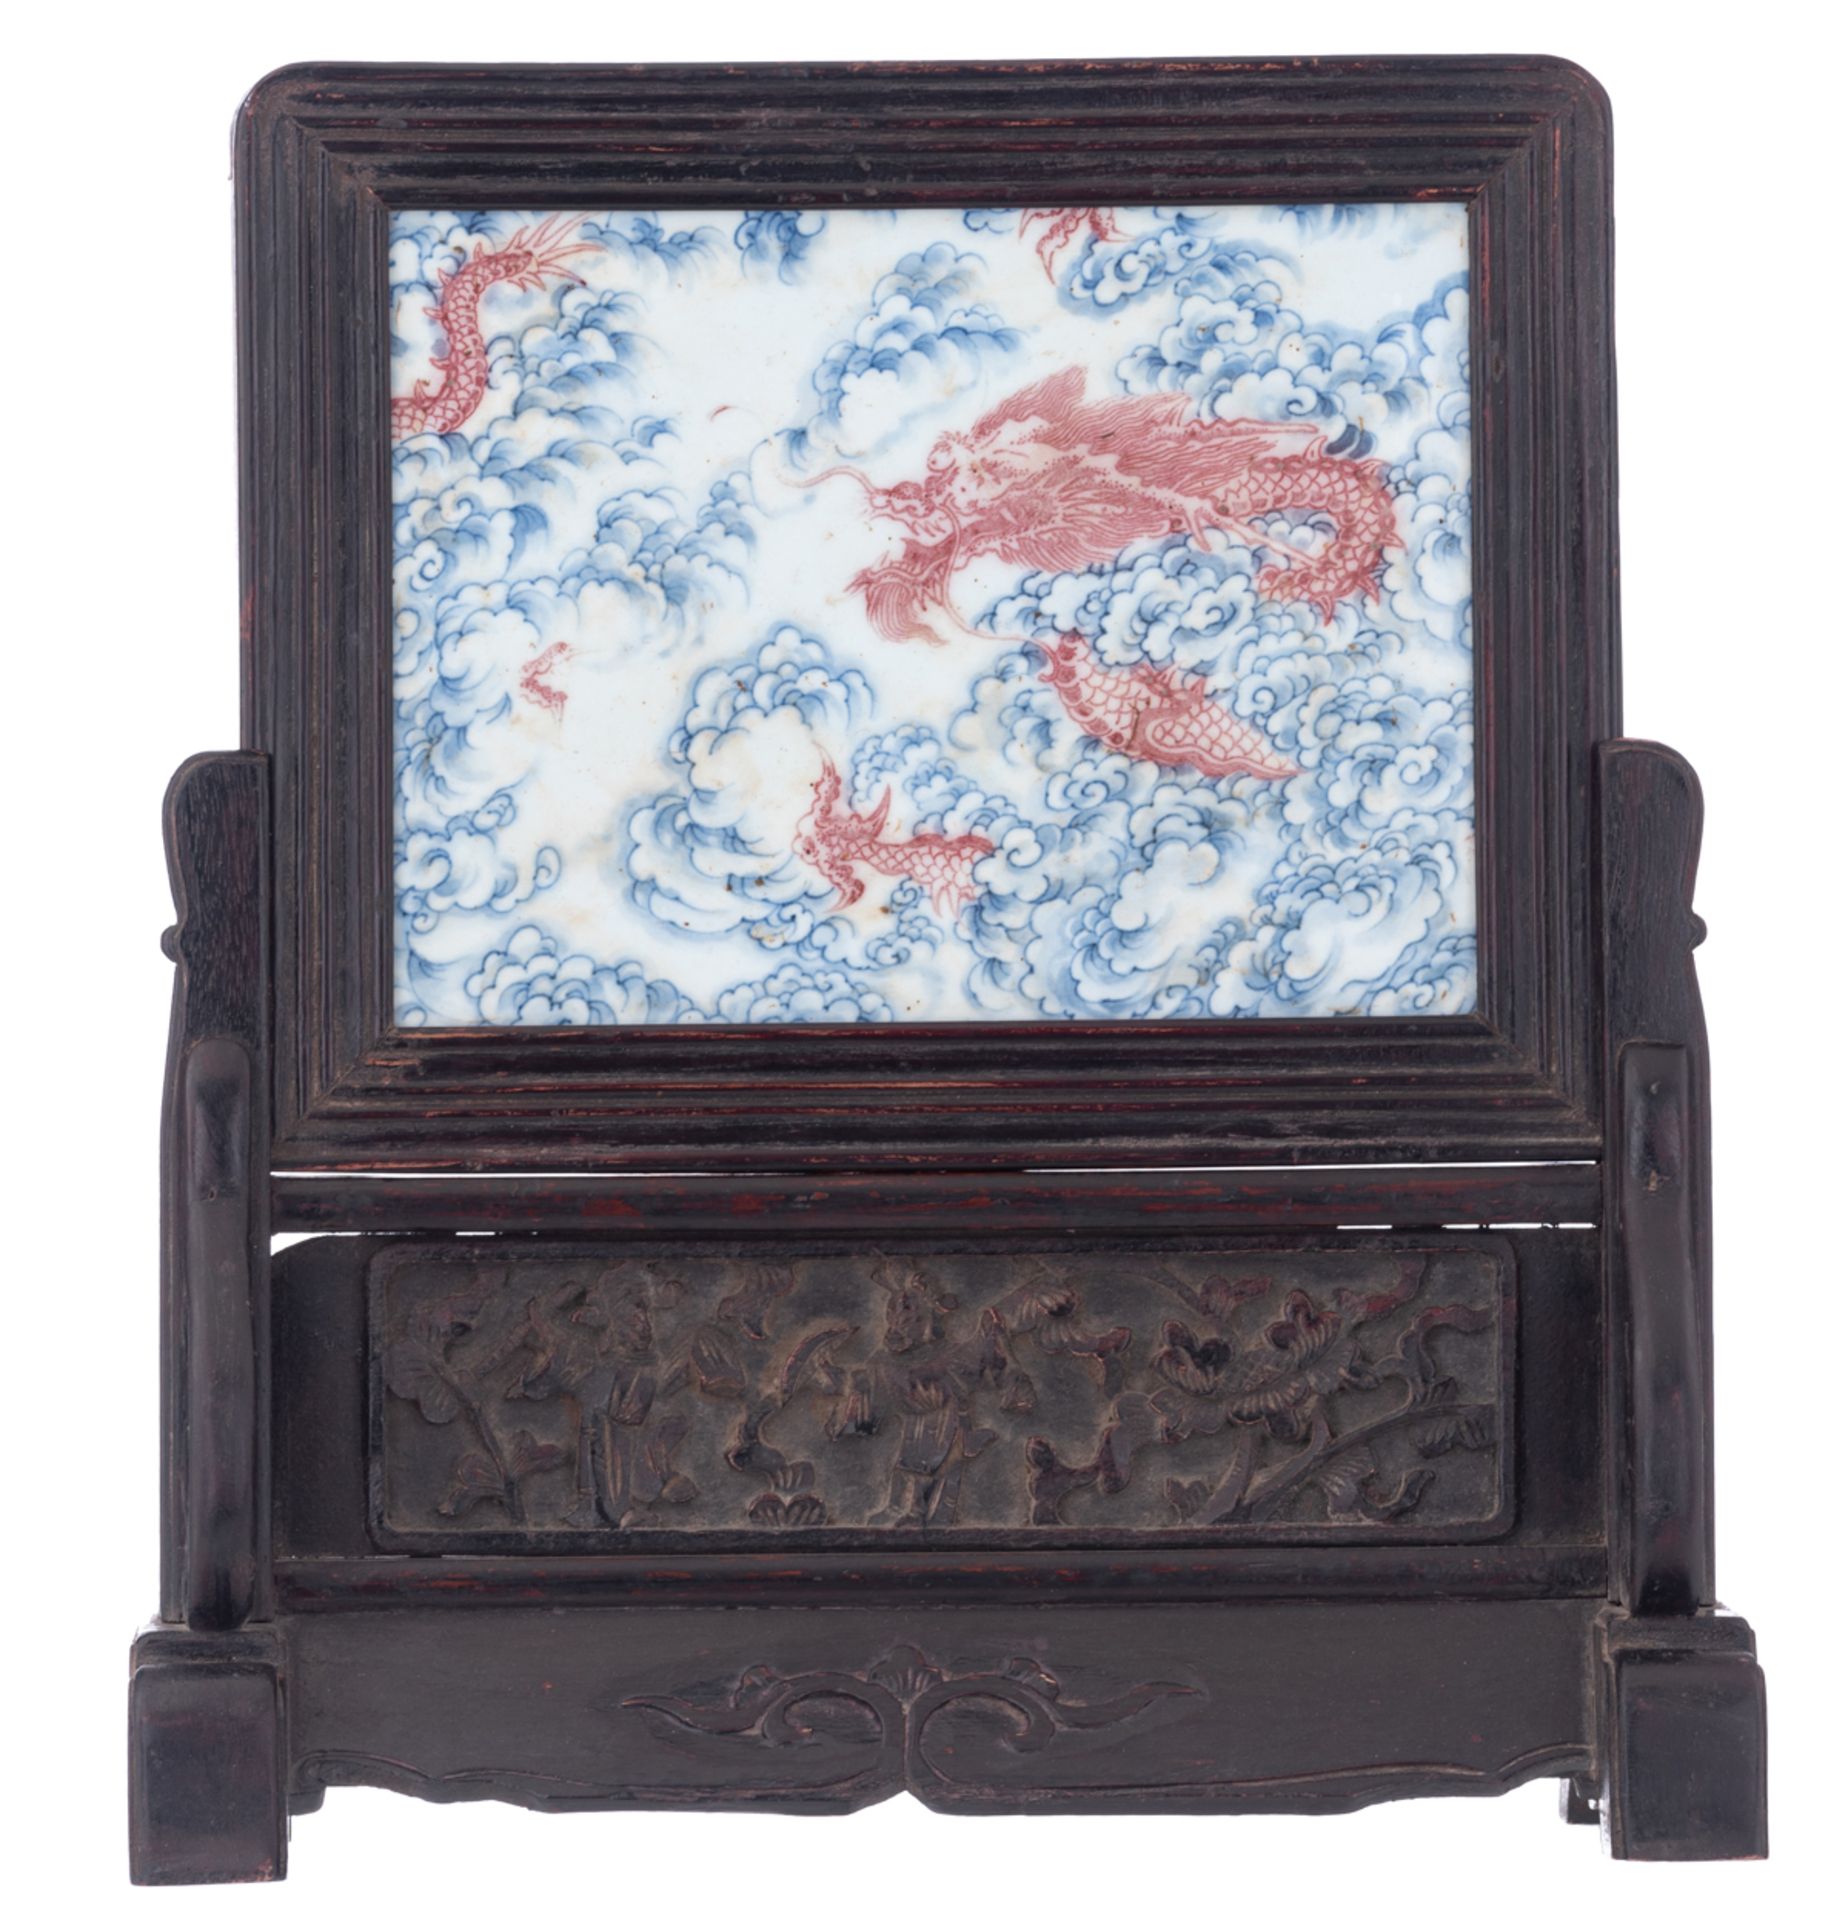 A Chinese rosewood table screen with a blue and white, and underglaze copper-red decorated porcelain